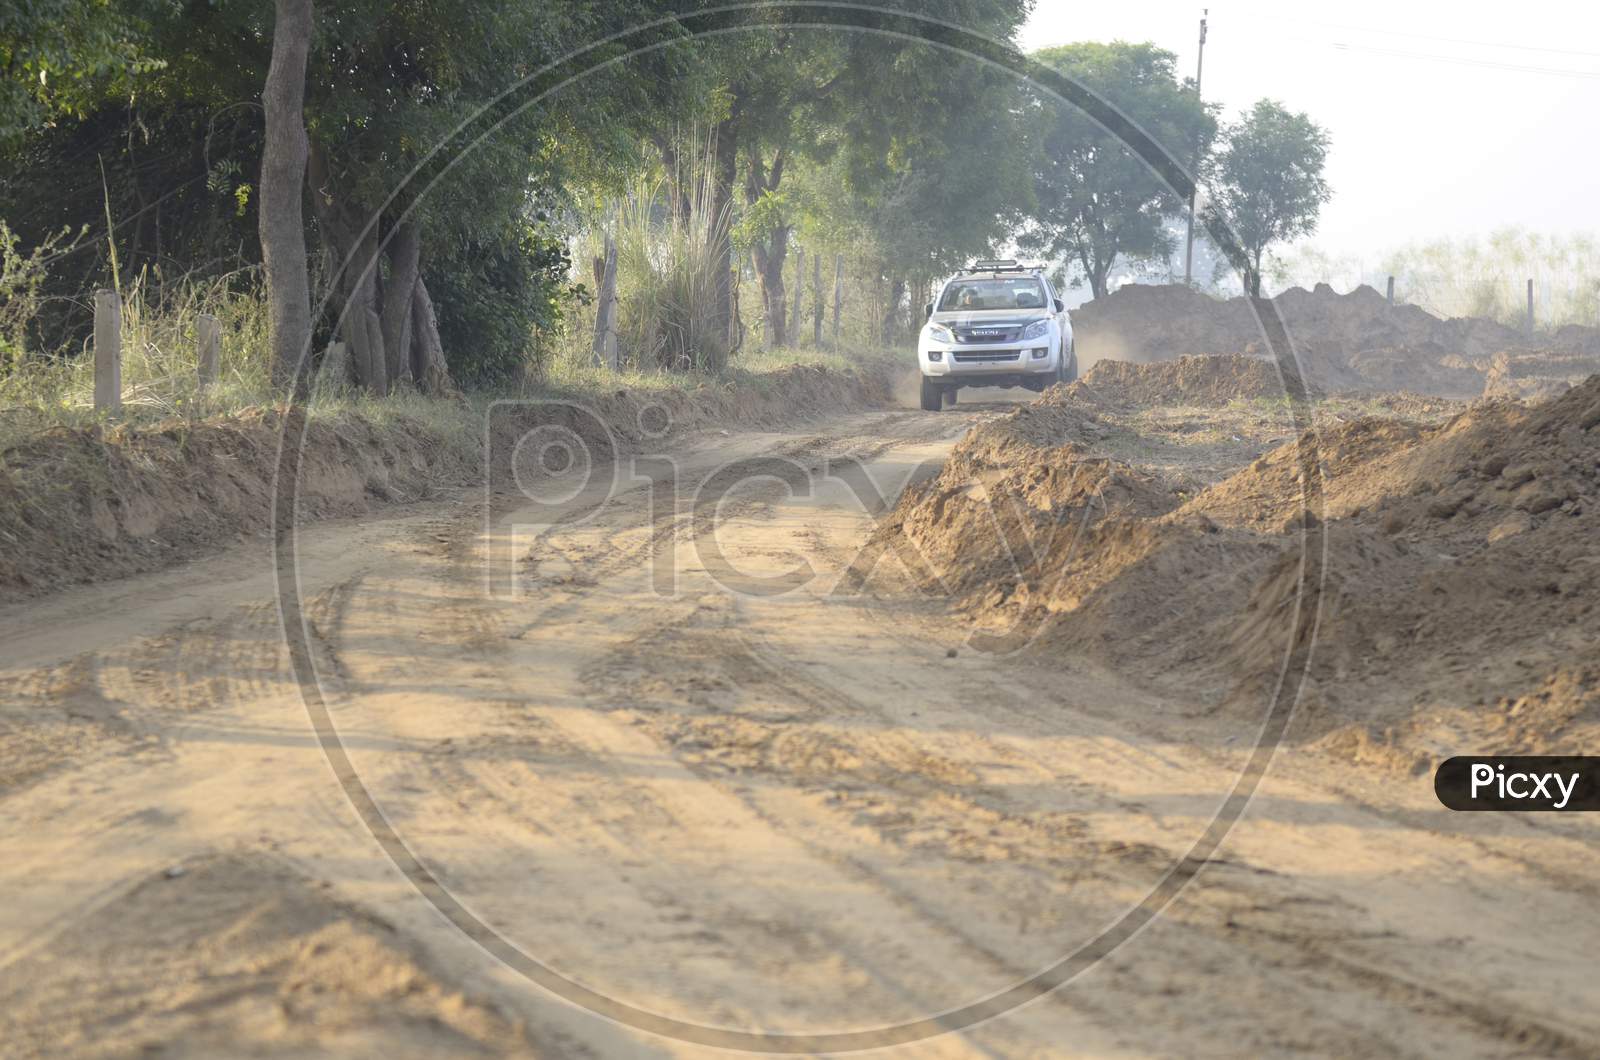 View of Isuzu Maxo moving along the off-road